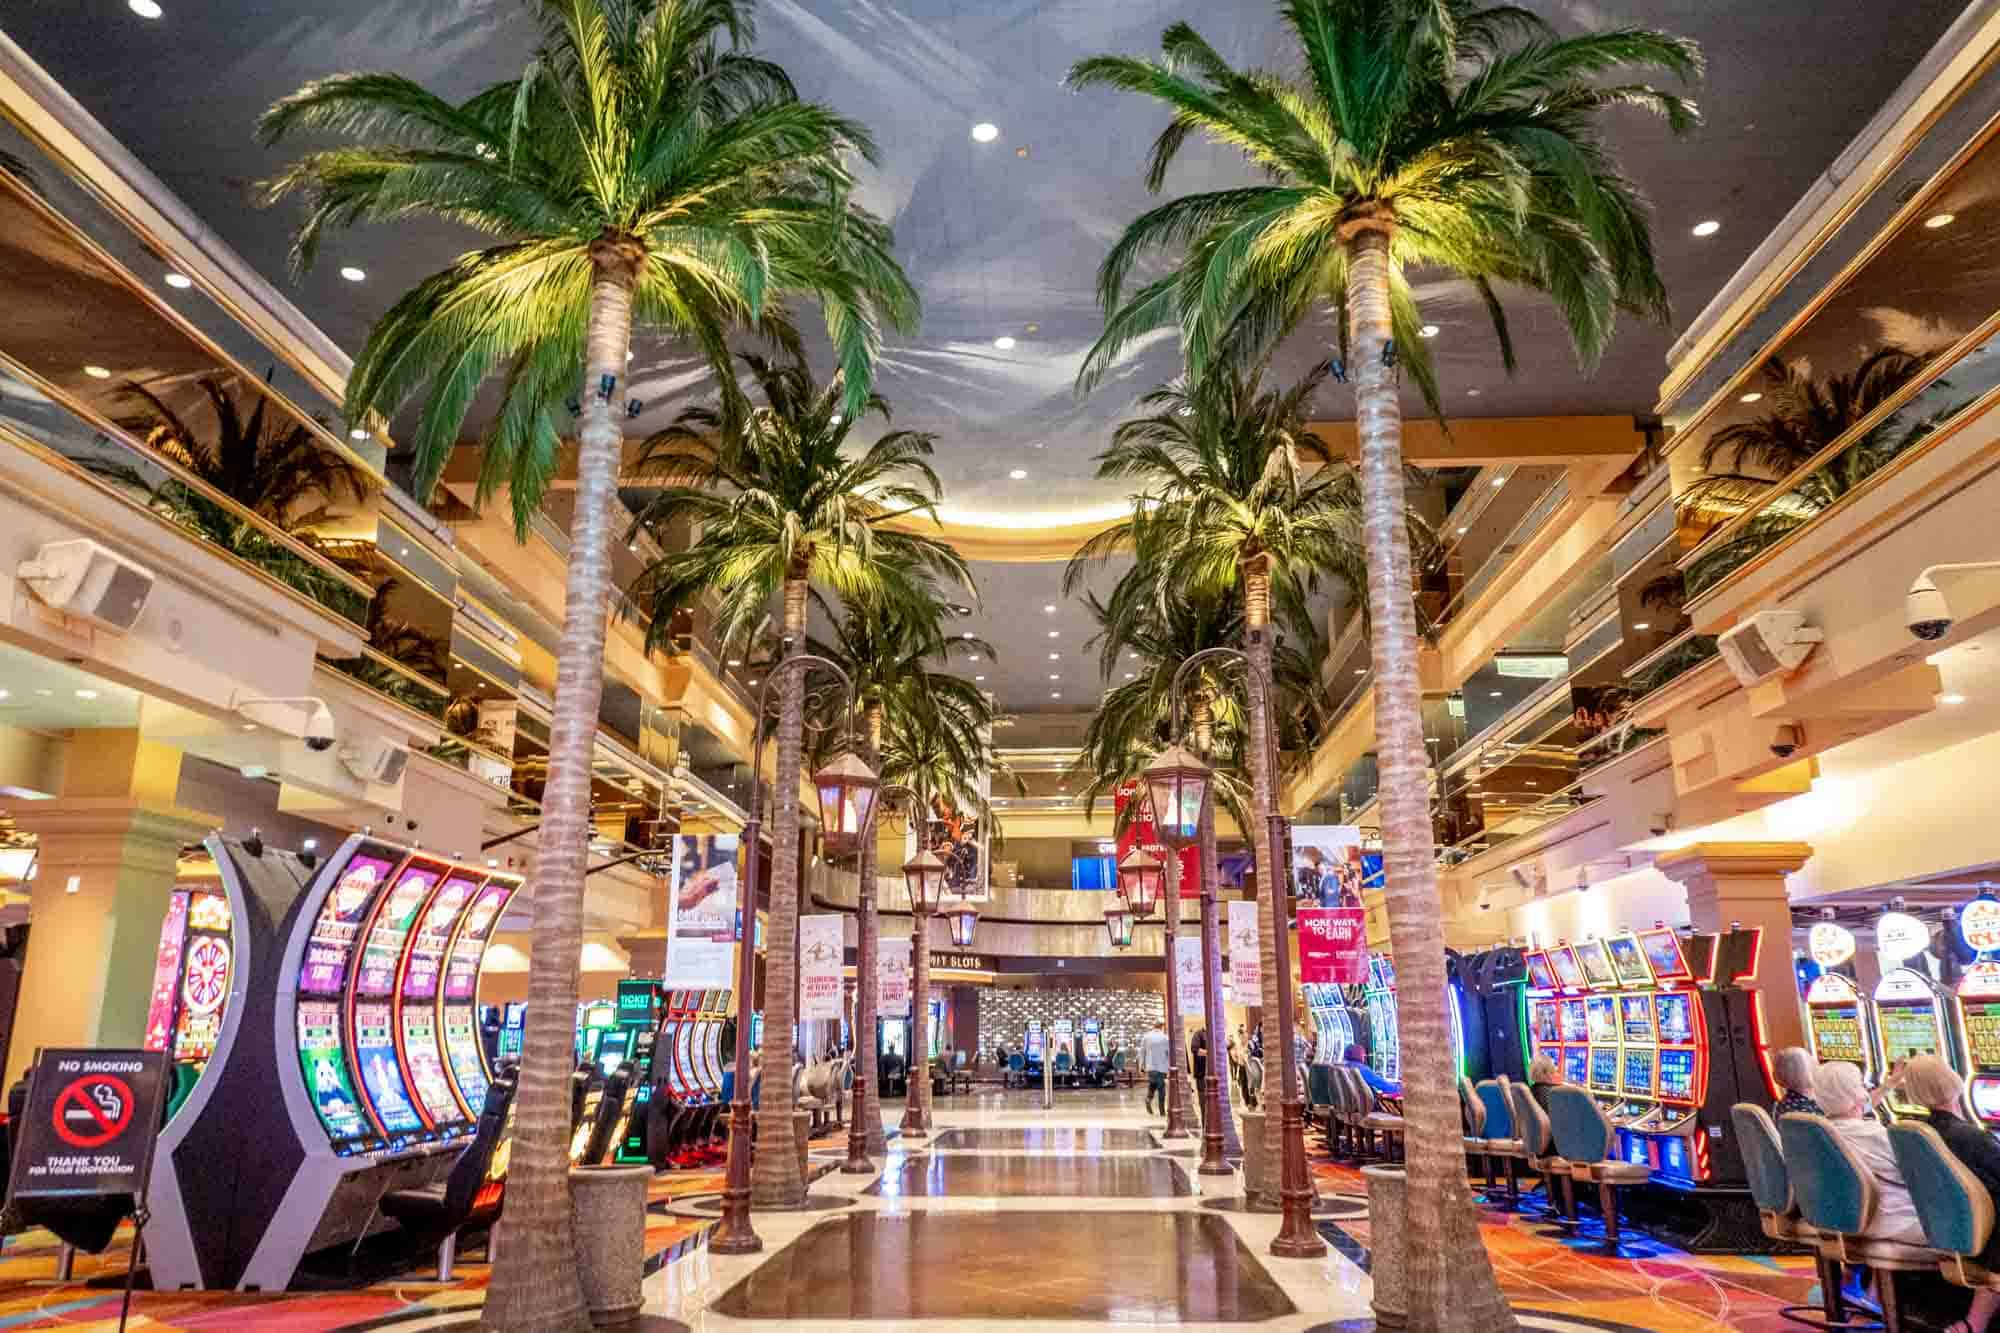 Two rows of palm trees inside Tropicana casino beside rows of video slot machines